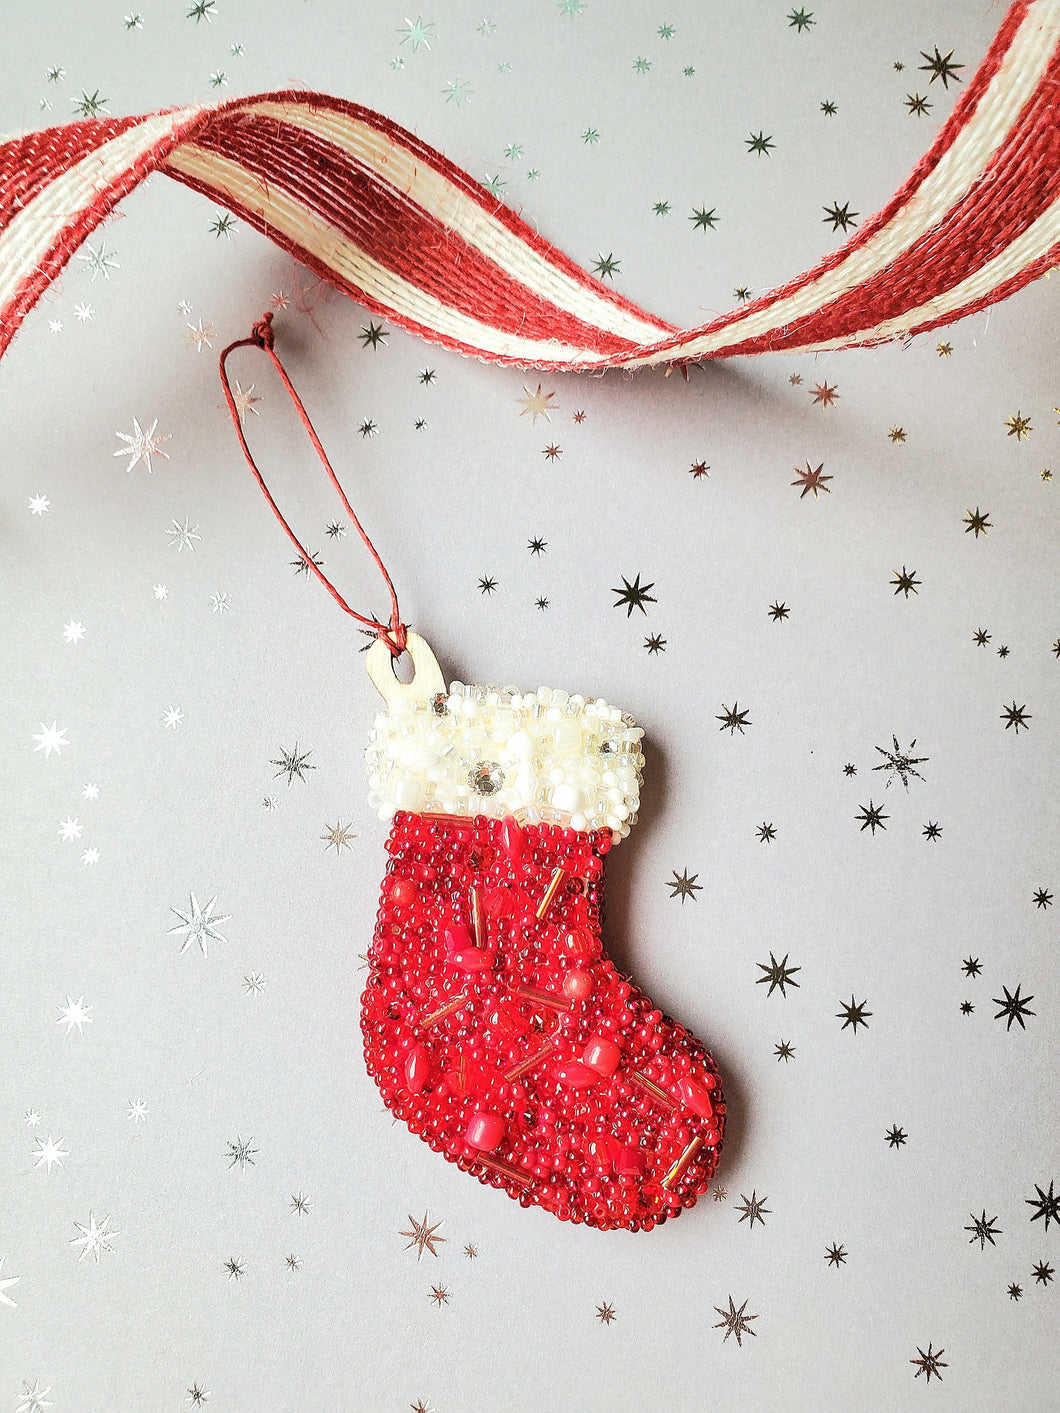 Small Stocking Ornament, Handmade Decor, Unique Gift, One Of A Kind Gift, Traditional Christmas Decor, Mini Ornaments, Cottagecore